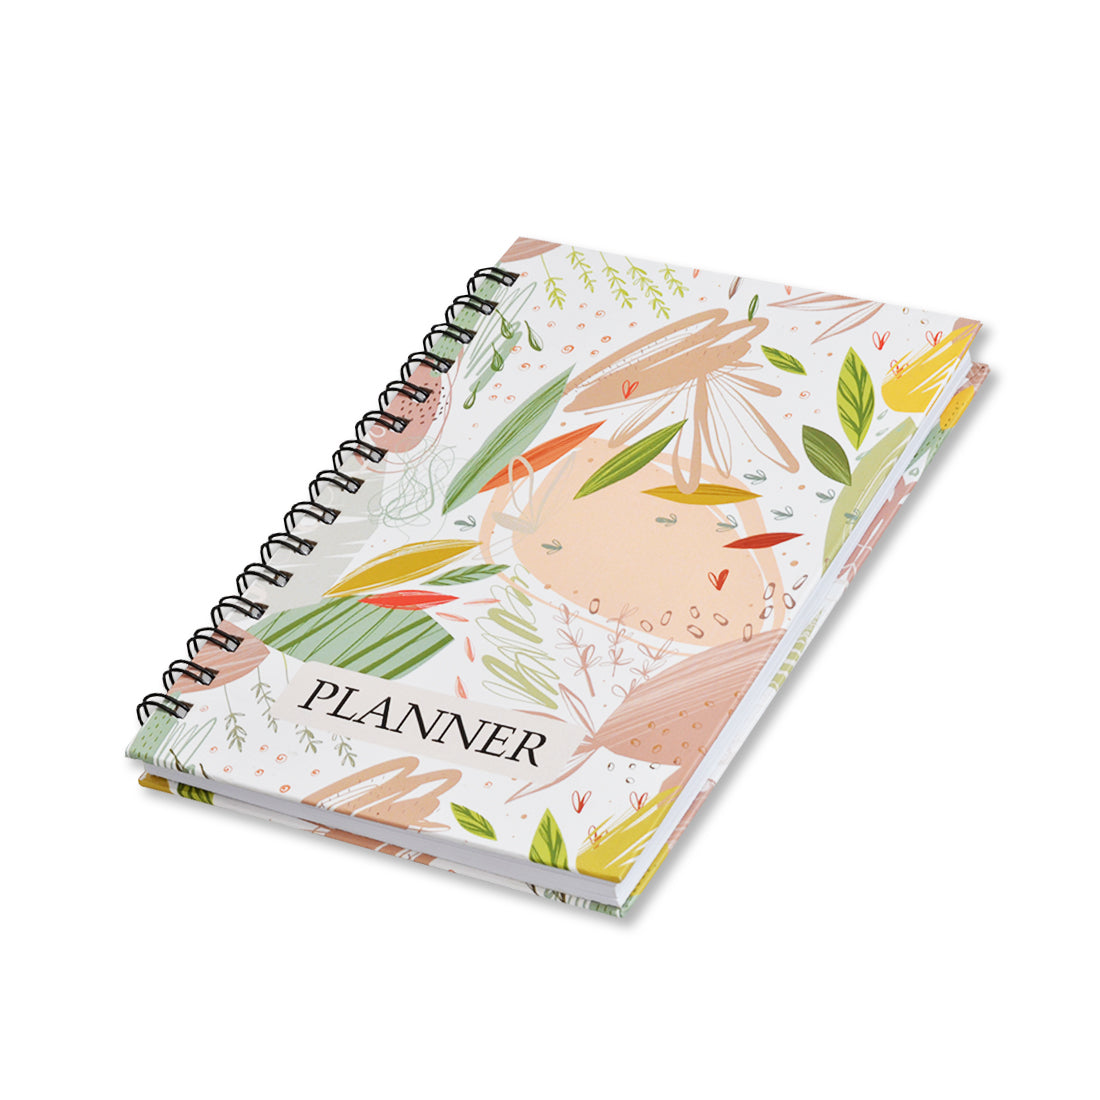 To Do List Notebook – Beautiful Daily Planner Easily Organizes Your Daily Tasks and Boosts Productivity – The Perfect Journal and Undated Office Supplies Notepad for Women